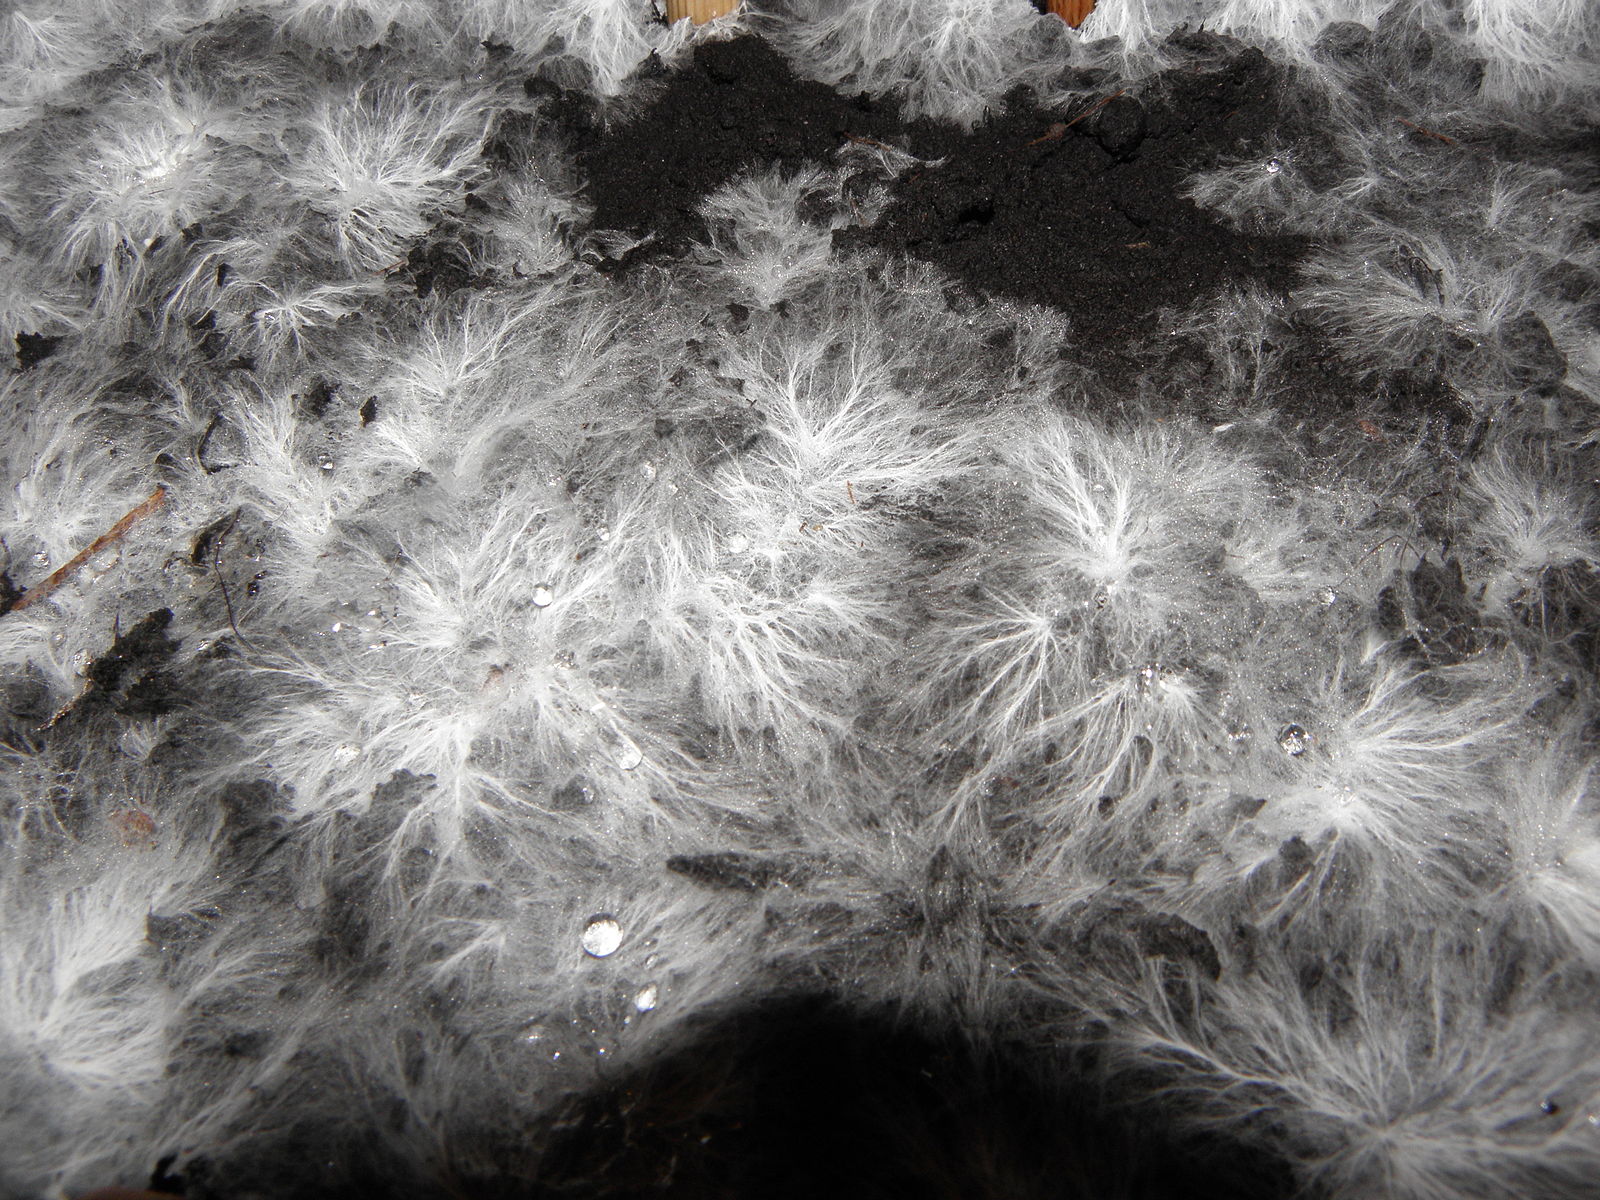 A microscopic close-up of a mycelial network.